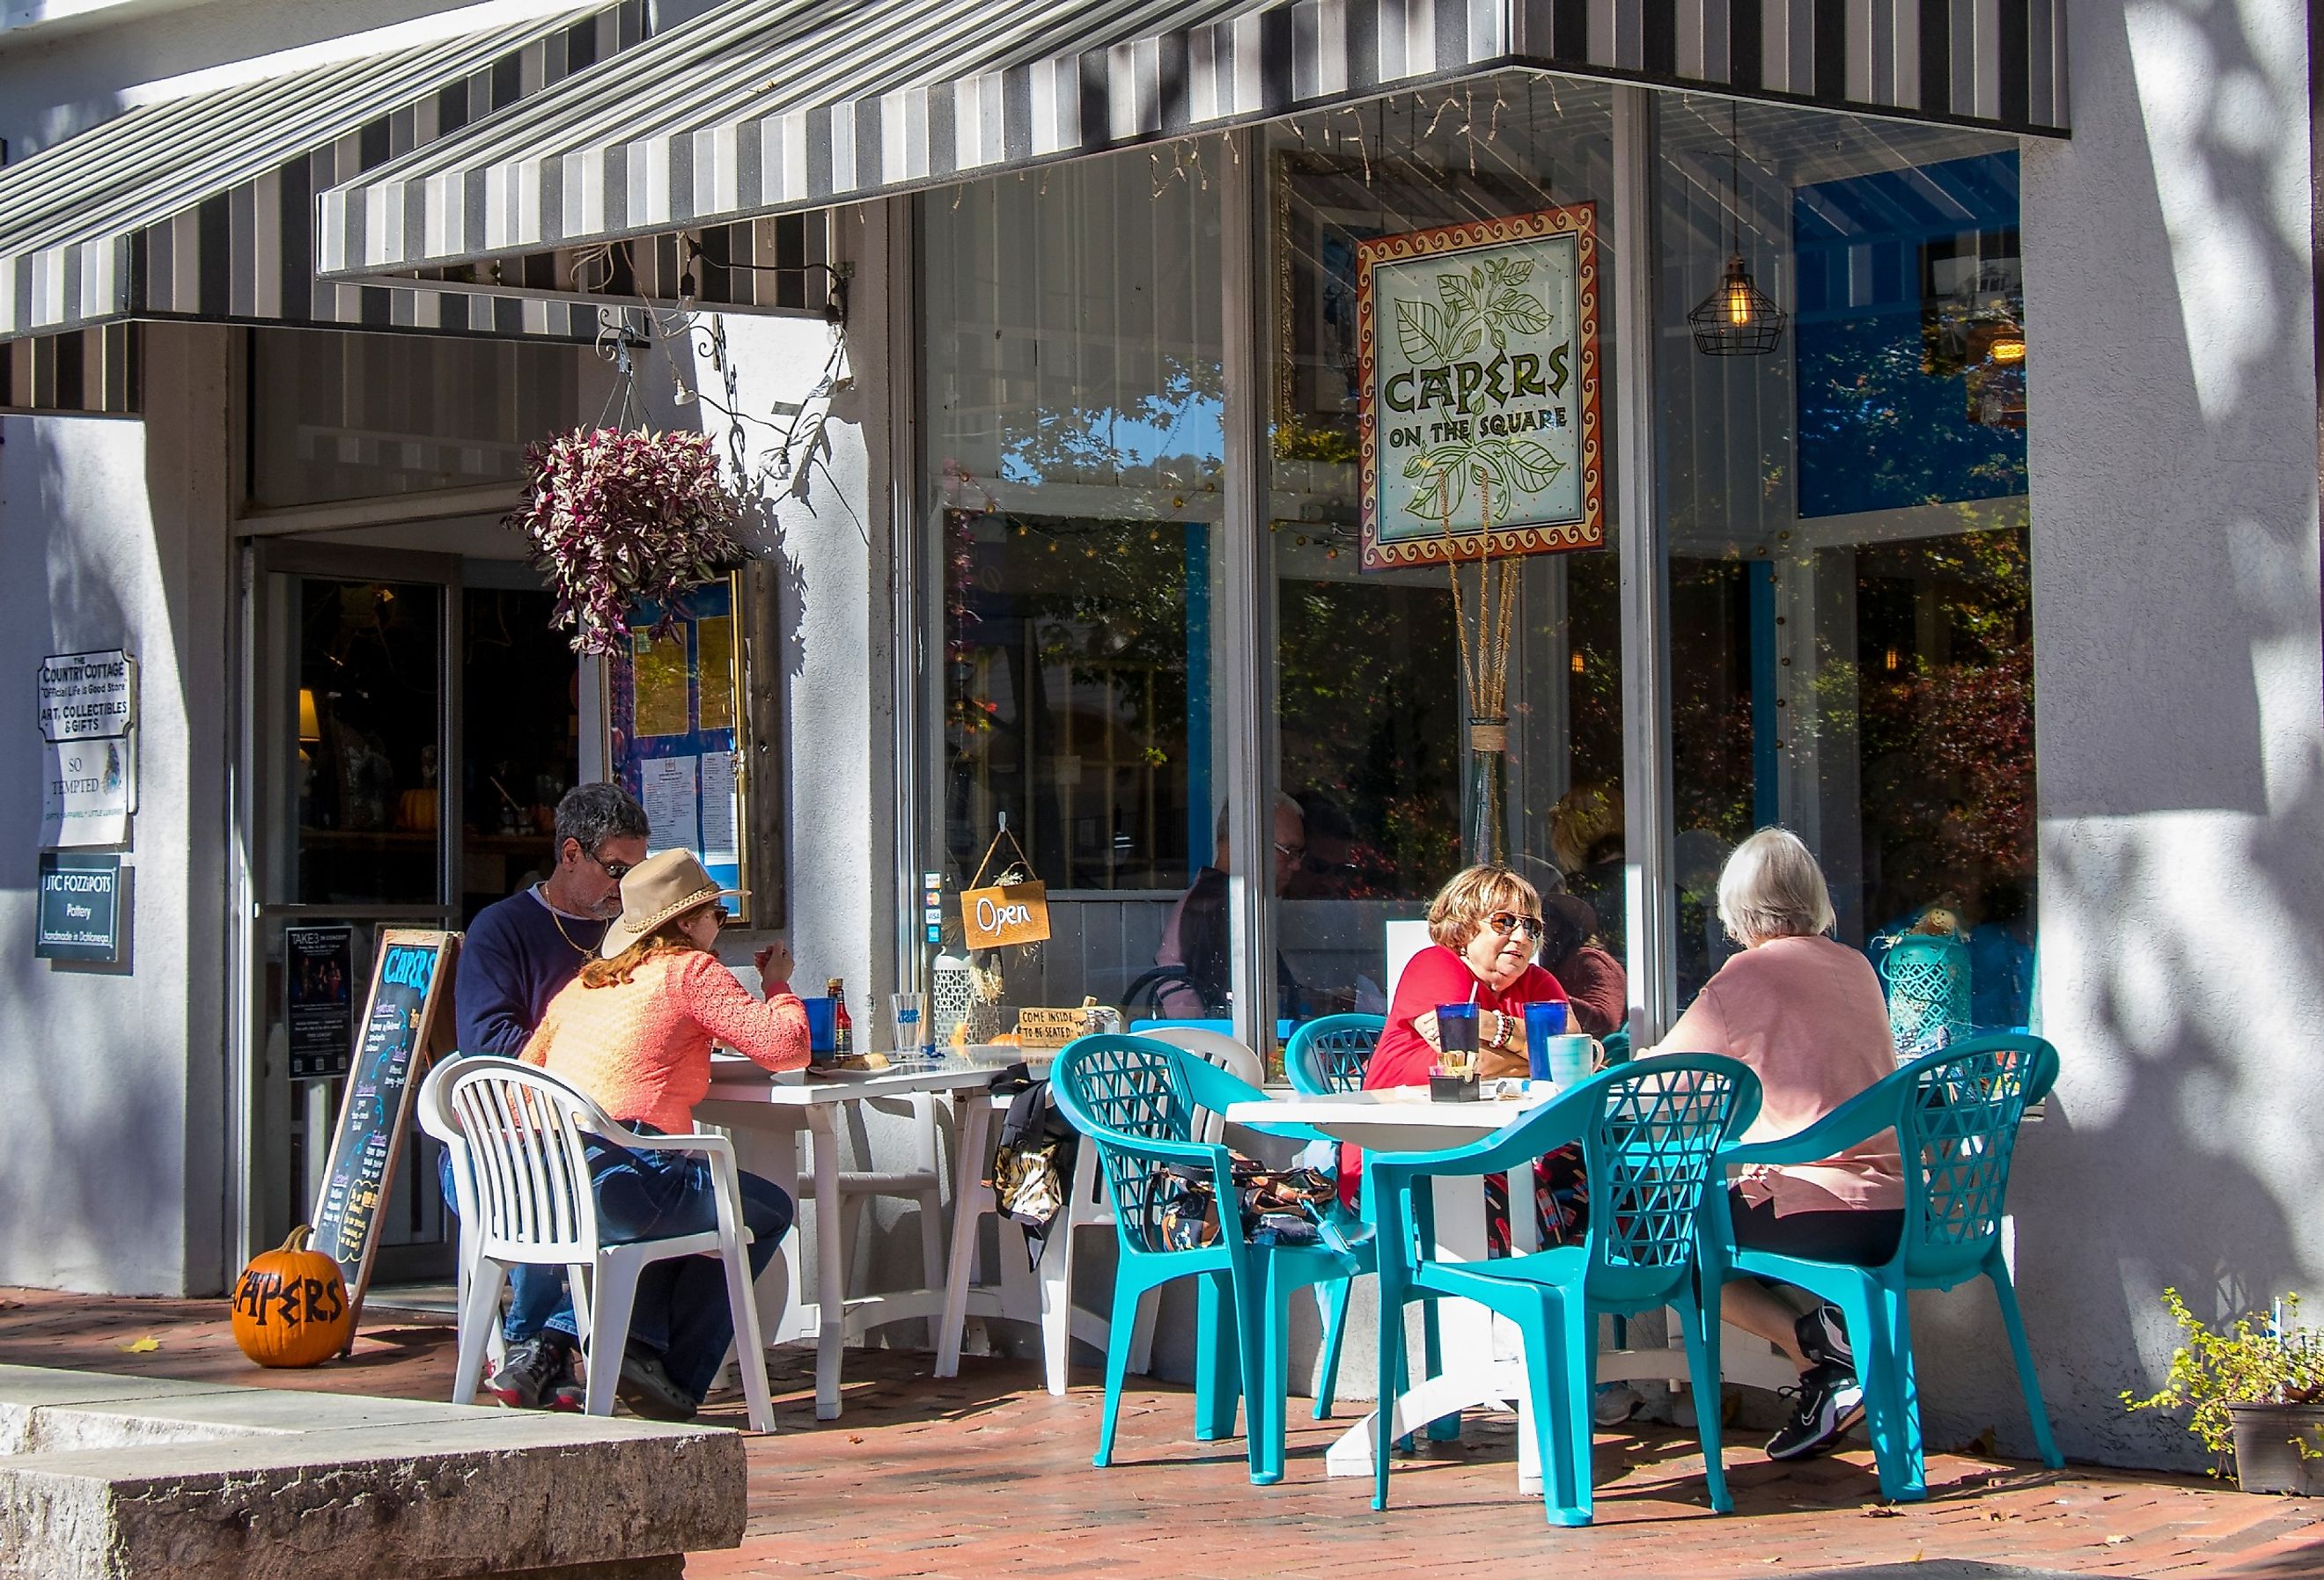 People dining outside a warm autumn afternoon in Dahlonega, Georgia. Image credit Jen Wolf via Shutterstock